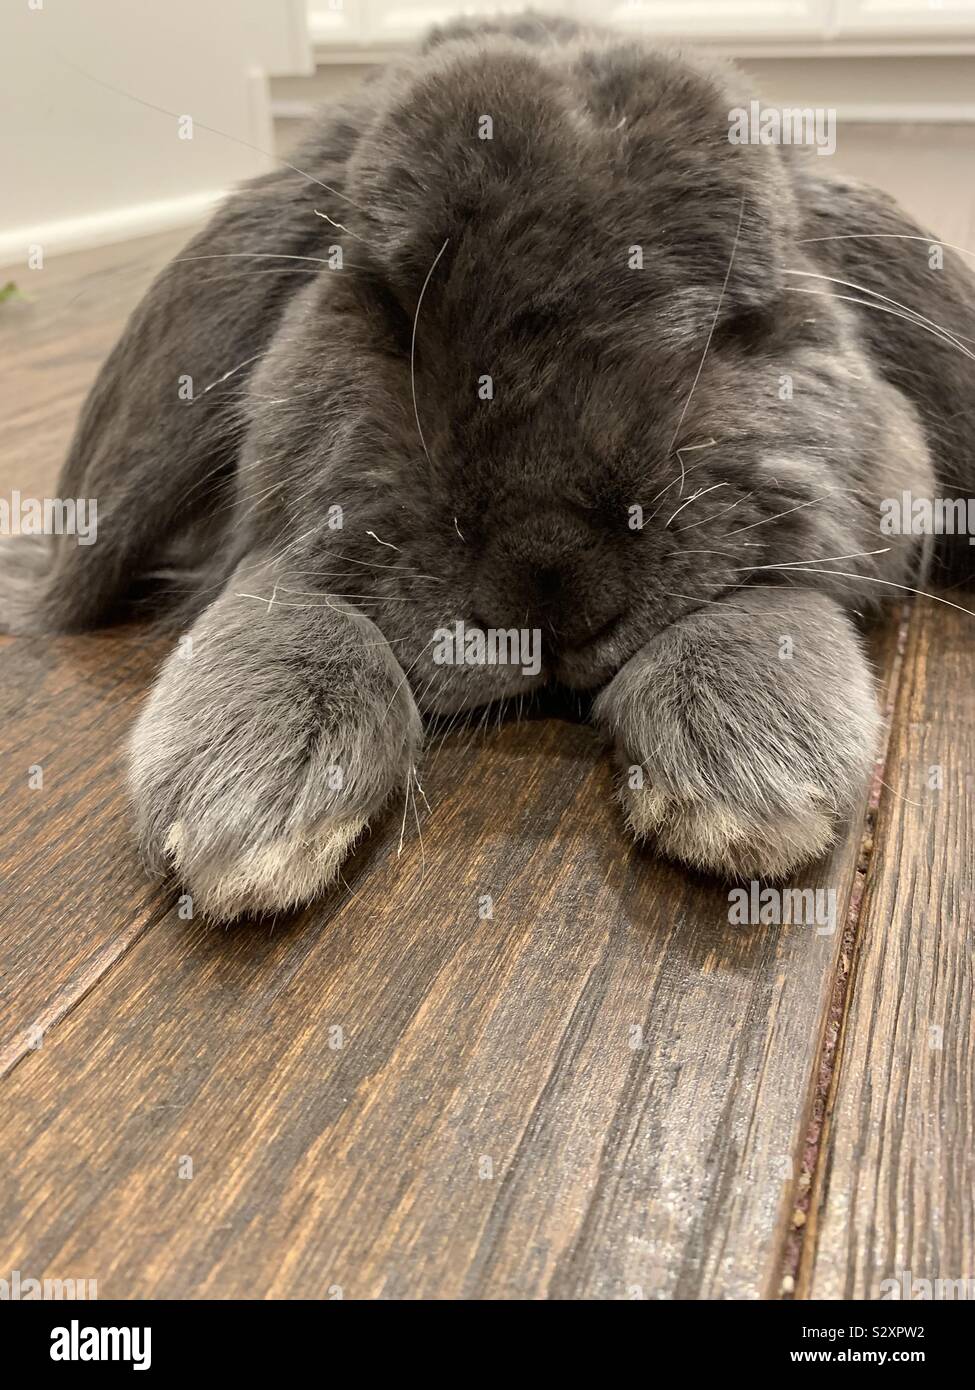 French Lop Rabbit Stock Photo